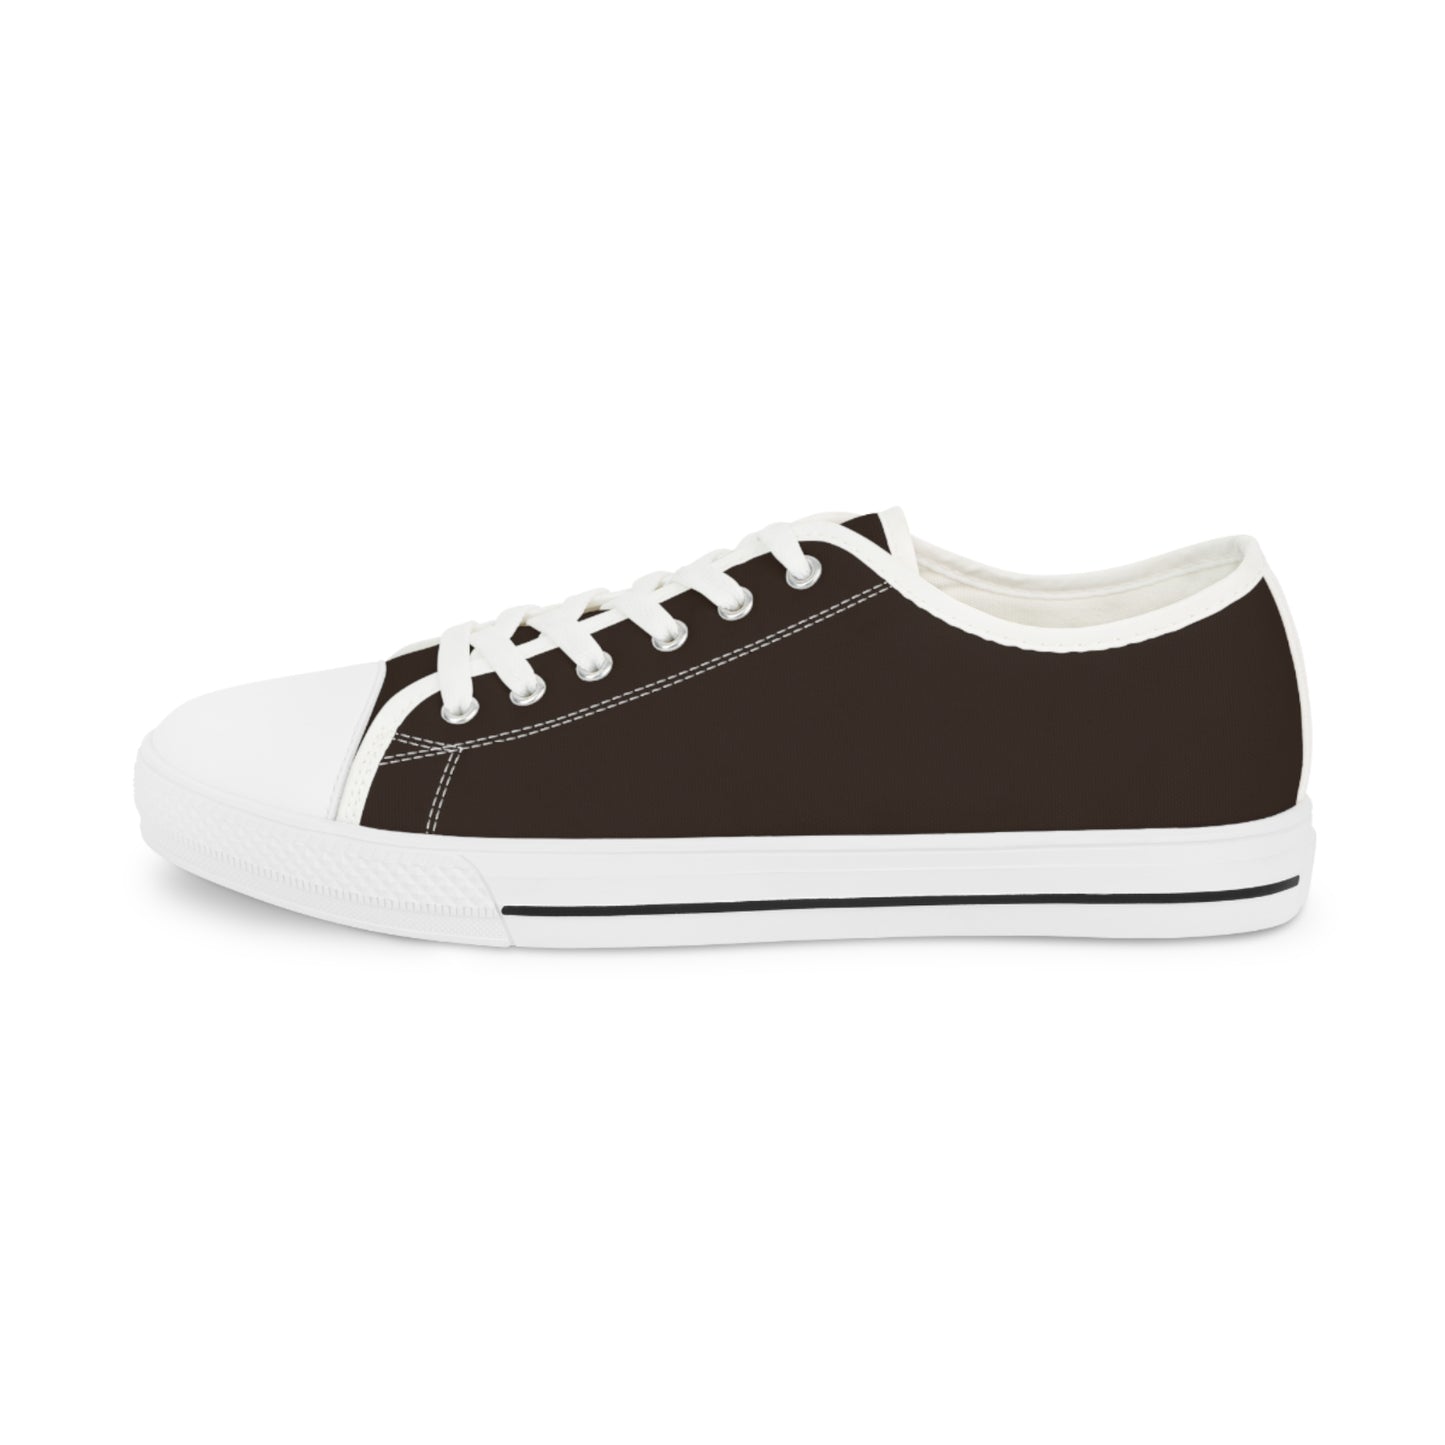 Men's Canvas Low Top Solid Color Sneakers - Chocolate Cherry US 14 Black sole